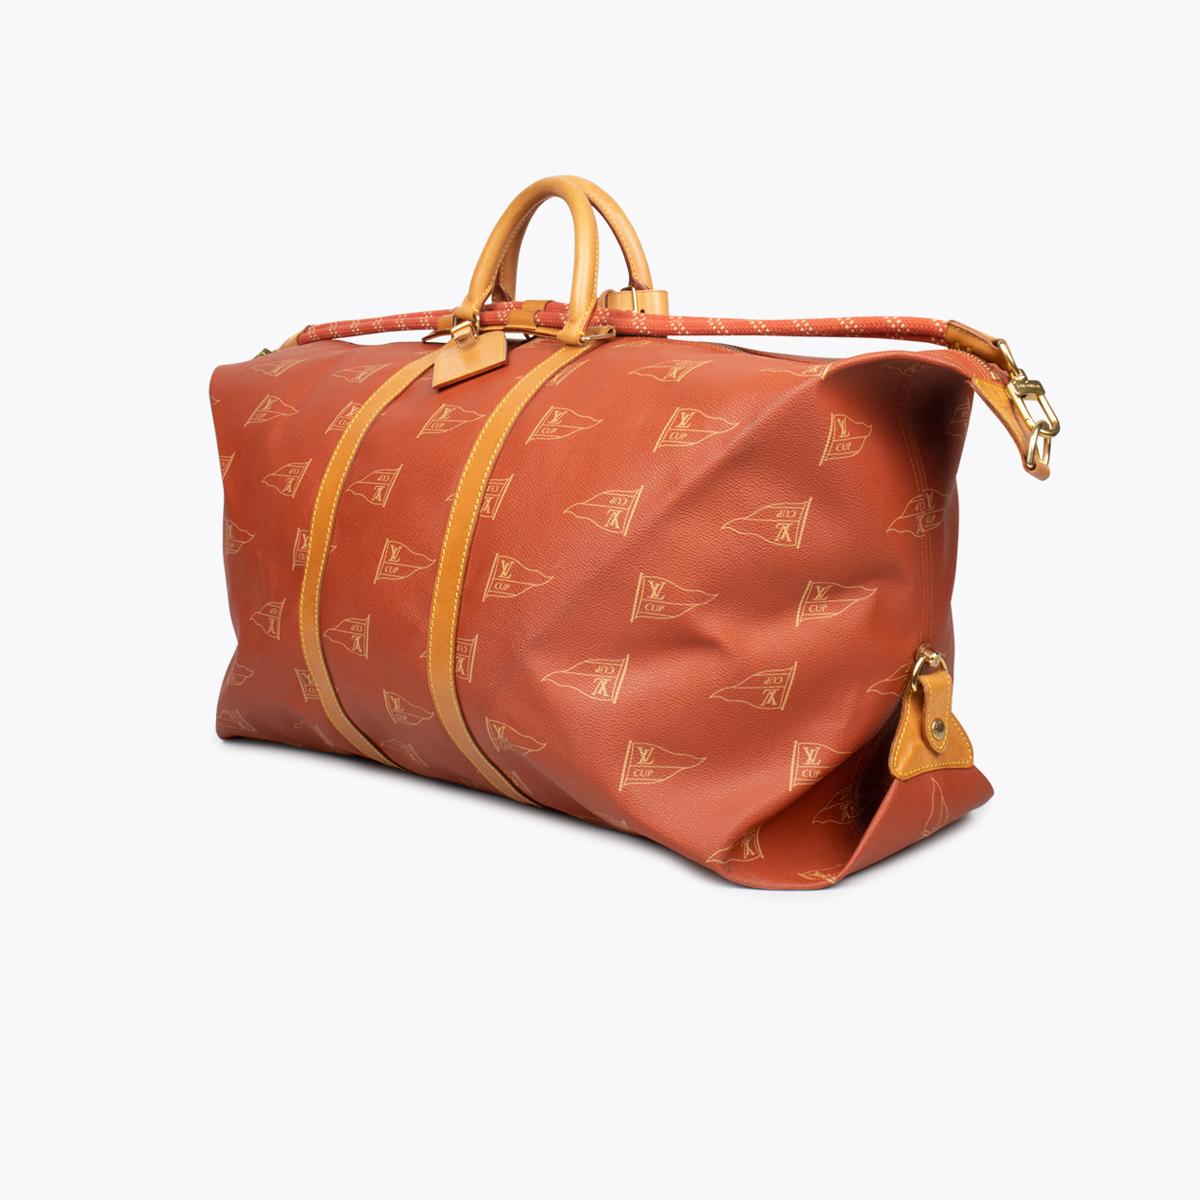 Brick and creme monogram coated canvas Louis Vuitton America's Cup duffle bag with

– Brass hardware
– Tan vachetta leather trim
– Dual rolled handles
– Detachable woven shoulder strap, brown canvas interior lining, single interior slit pocket and